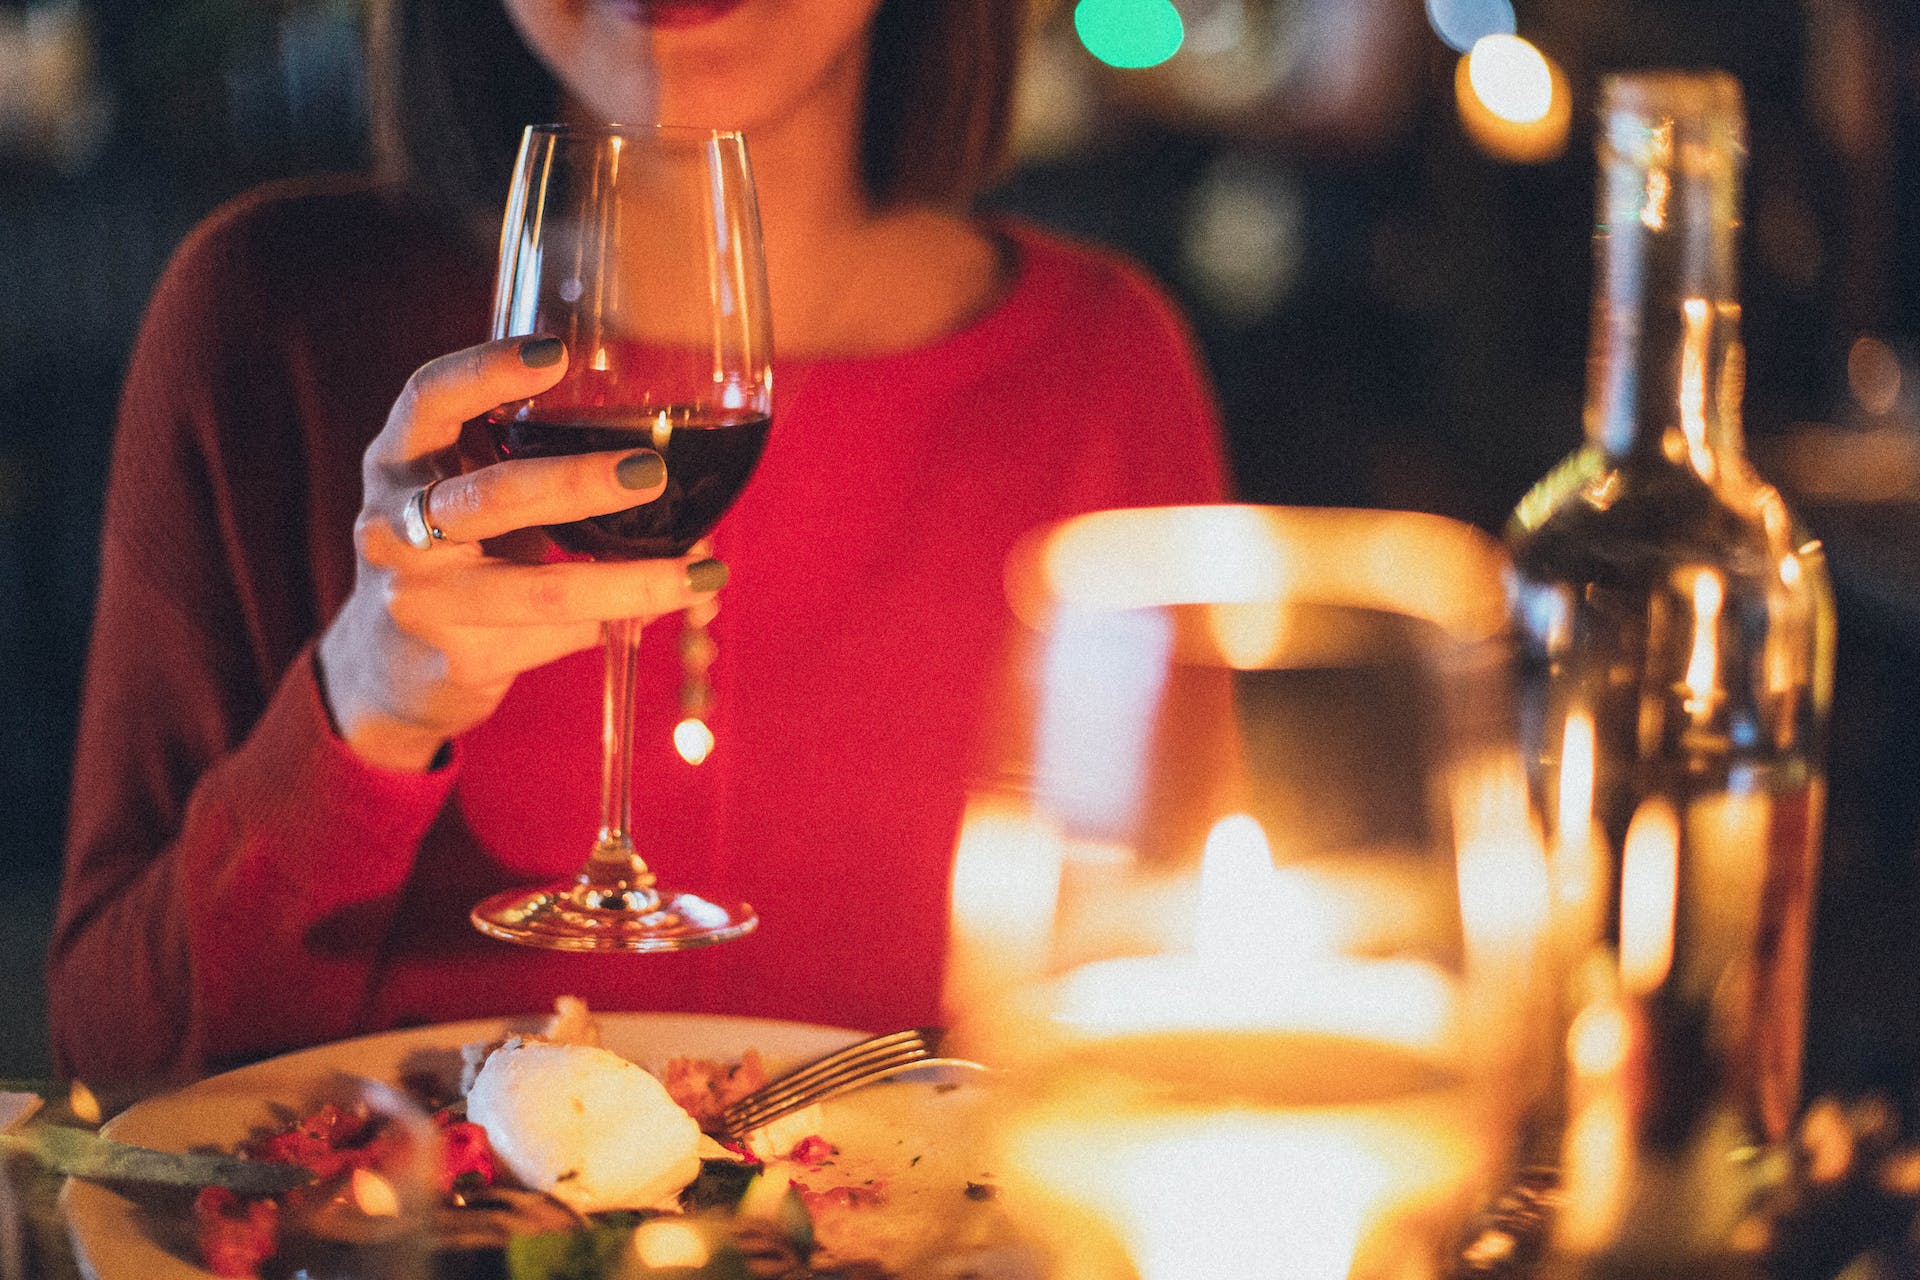 A woman holding a glass of wine during dinner in a restaurant | Source: Pexels